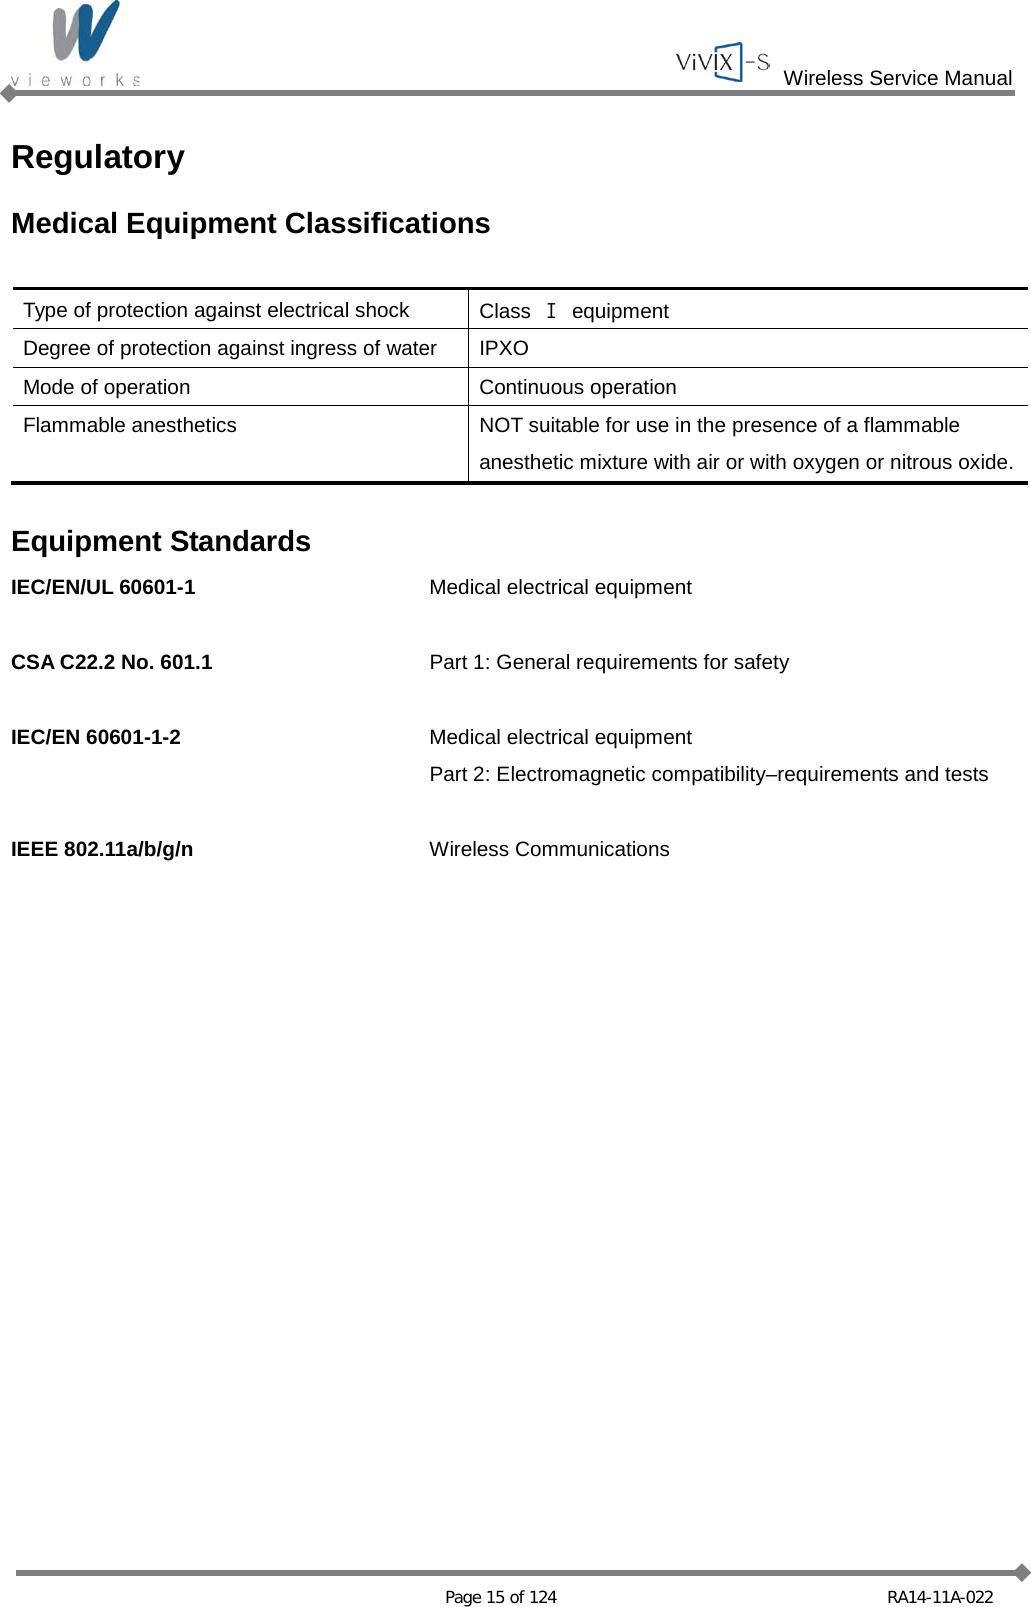  Wireless Service Manual   Page 15 of 124 RA14-11A-022 Regulatory Medical Equipment Classifications  Type of protection against electrical shock Class  Ⅰ equipment Degree of protection against ingress of water IPXO Mode of operation Continuous operation Flammable anesthetics NOT suitable for use in the presence of a flammable anesthetic mixture with air or with oxygen or nitrous oxide.  Equipment Standards IEC/EN/UL 60601-1 Medical electrical equipment  CSA C22.2 No. 601.1 Part 1: General requirements for safety  IEC/EN 60601-1-2 Medical electrical equipment  Part 2: Electromagnetic compatibility–requirements and tests  IEEE 802.11a/b/g/n Wireless Communications  